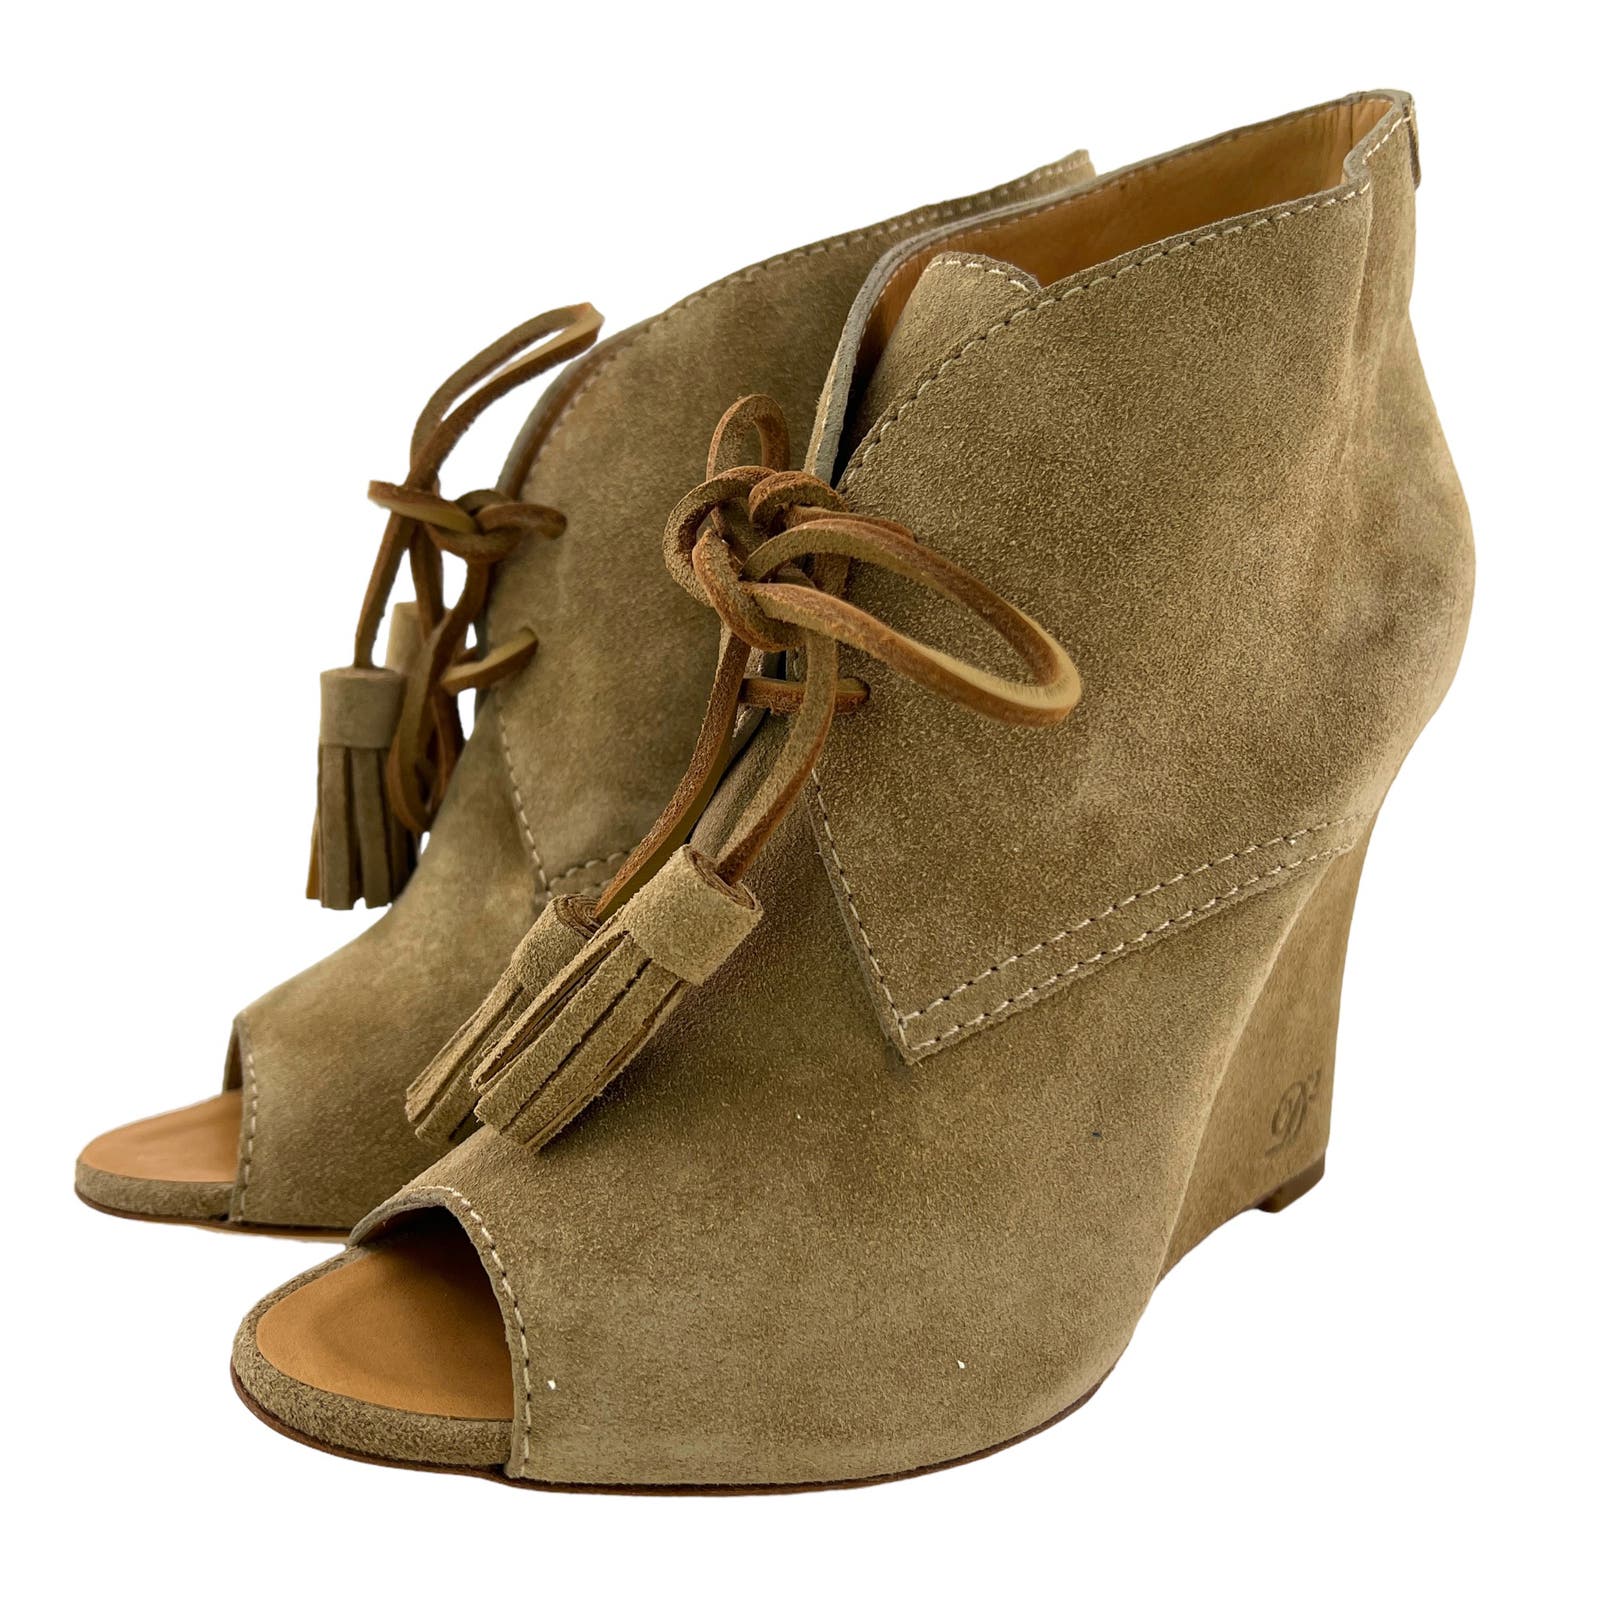 Dsquared2 Women US 7 and US 9 Booties Suede Leather Peep Toe Wedge Heels